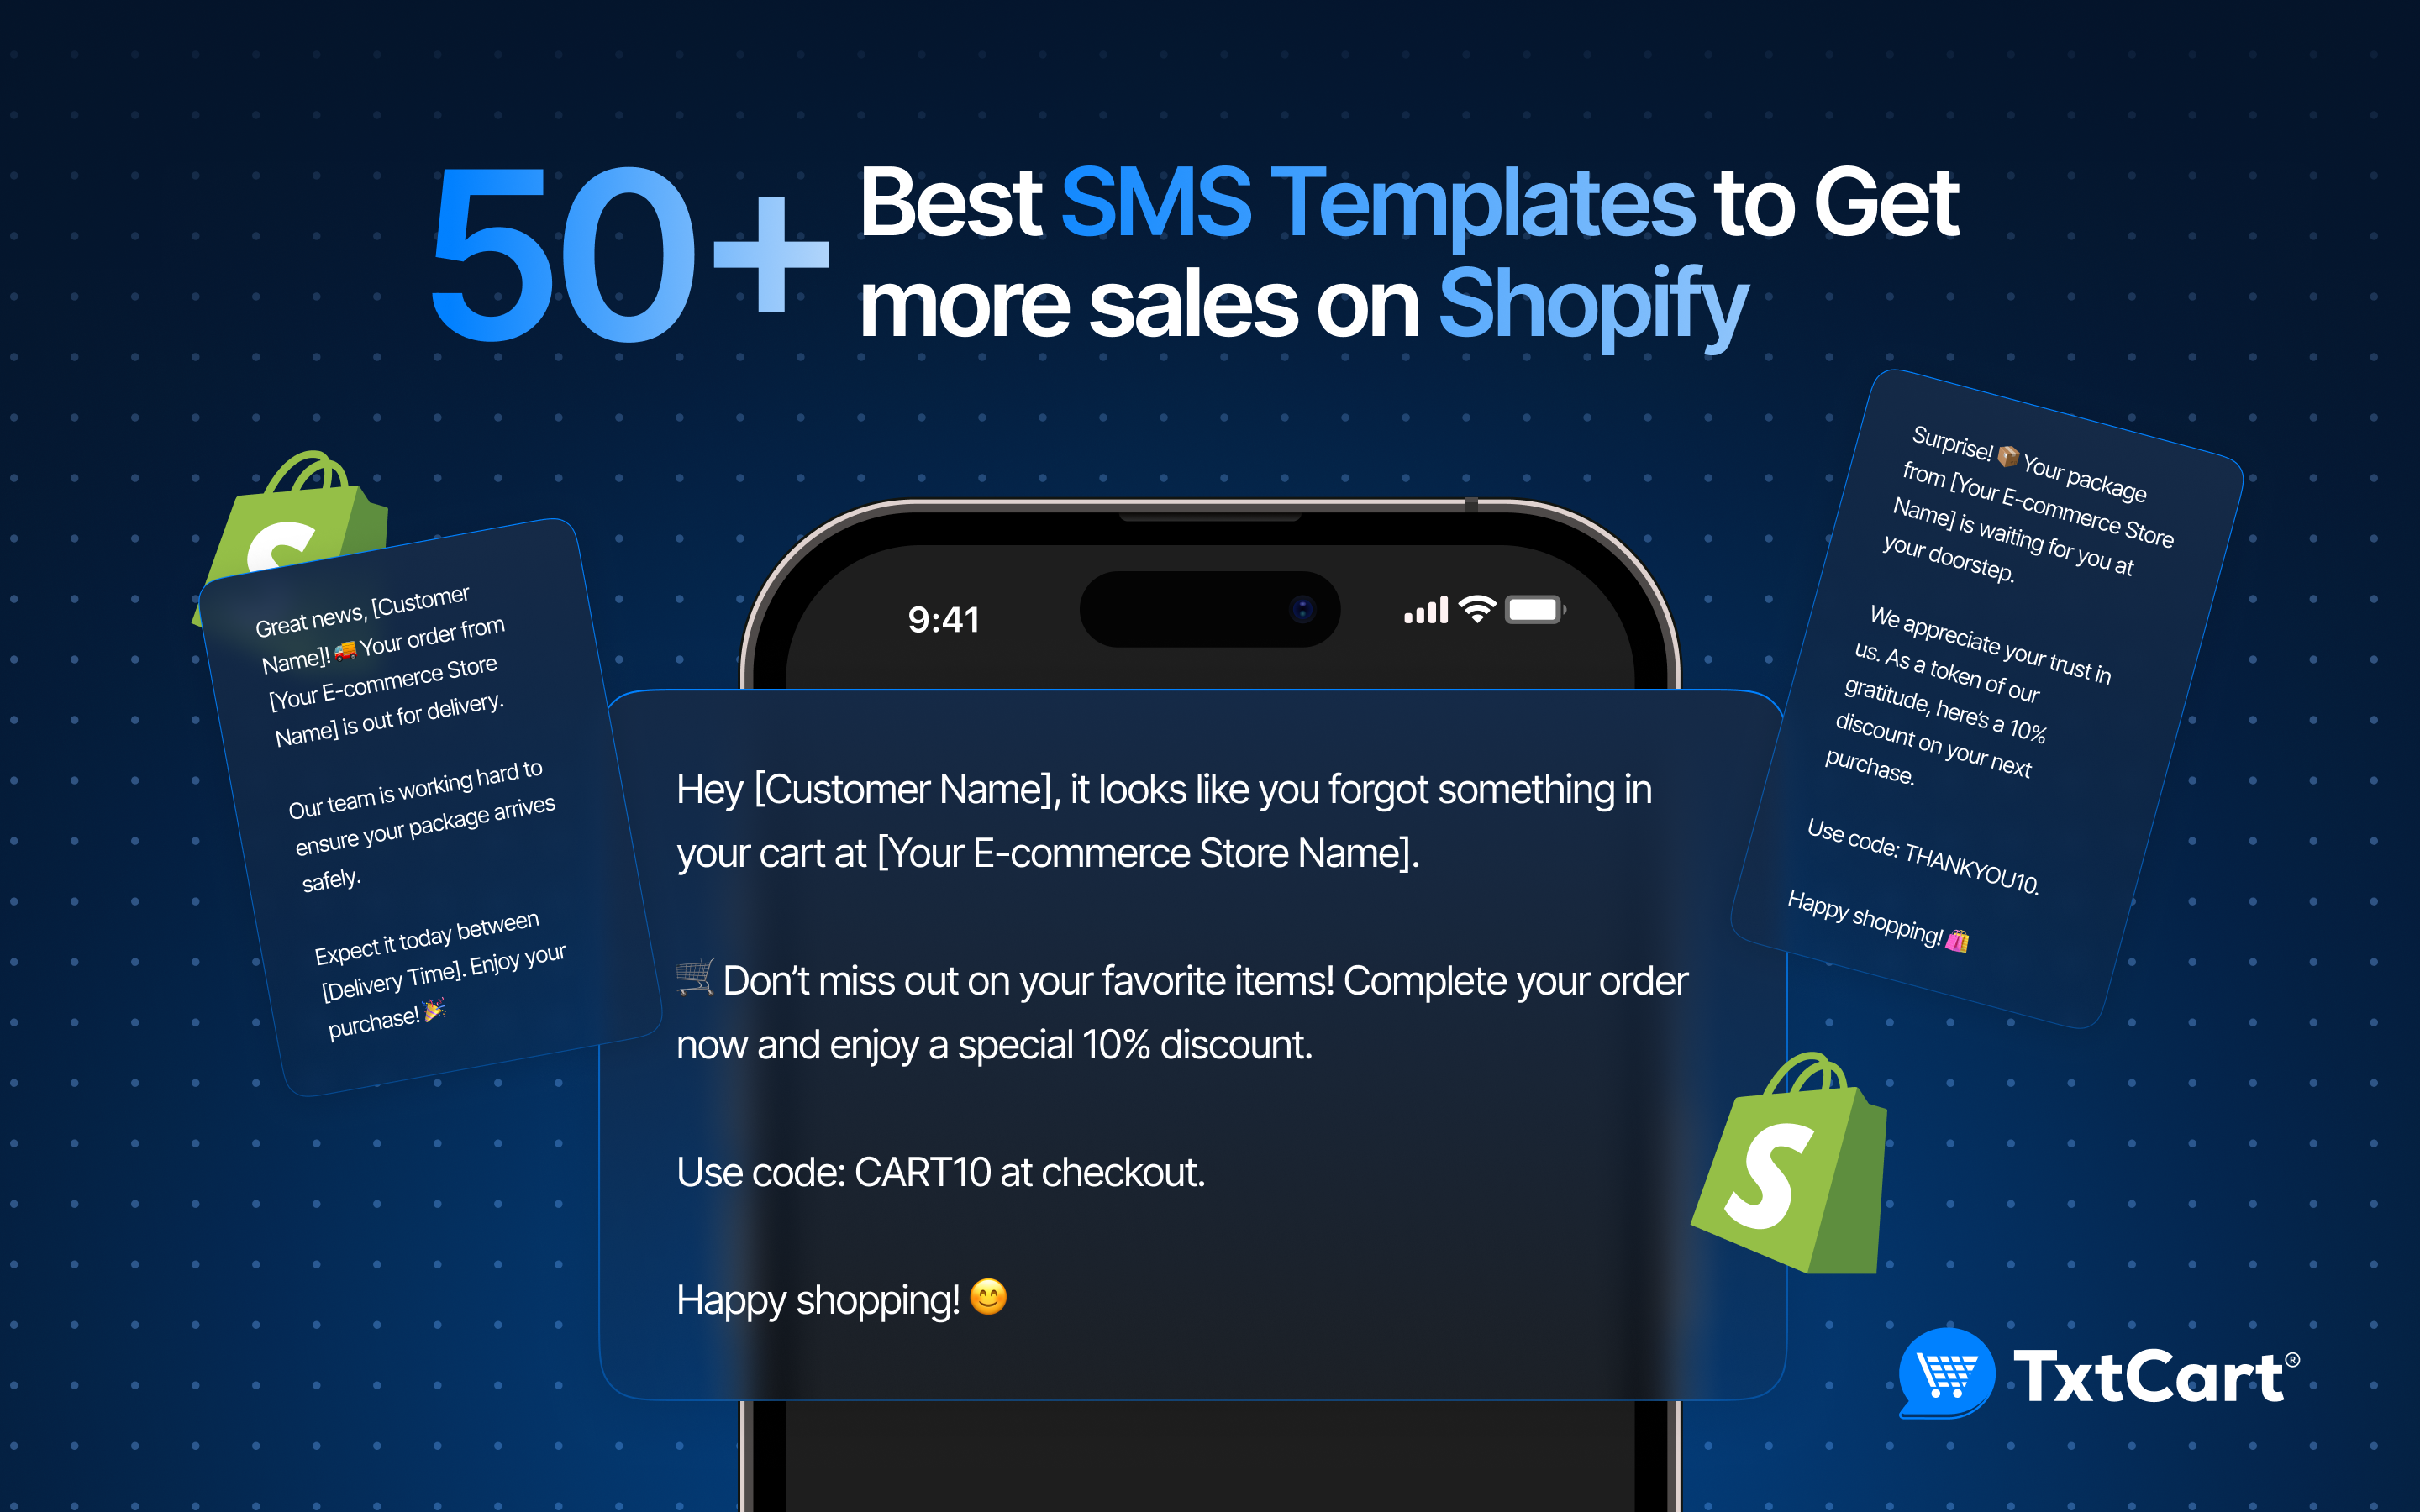 50+ Best SMS Templates to Get more sales on Shopify